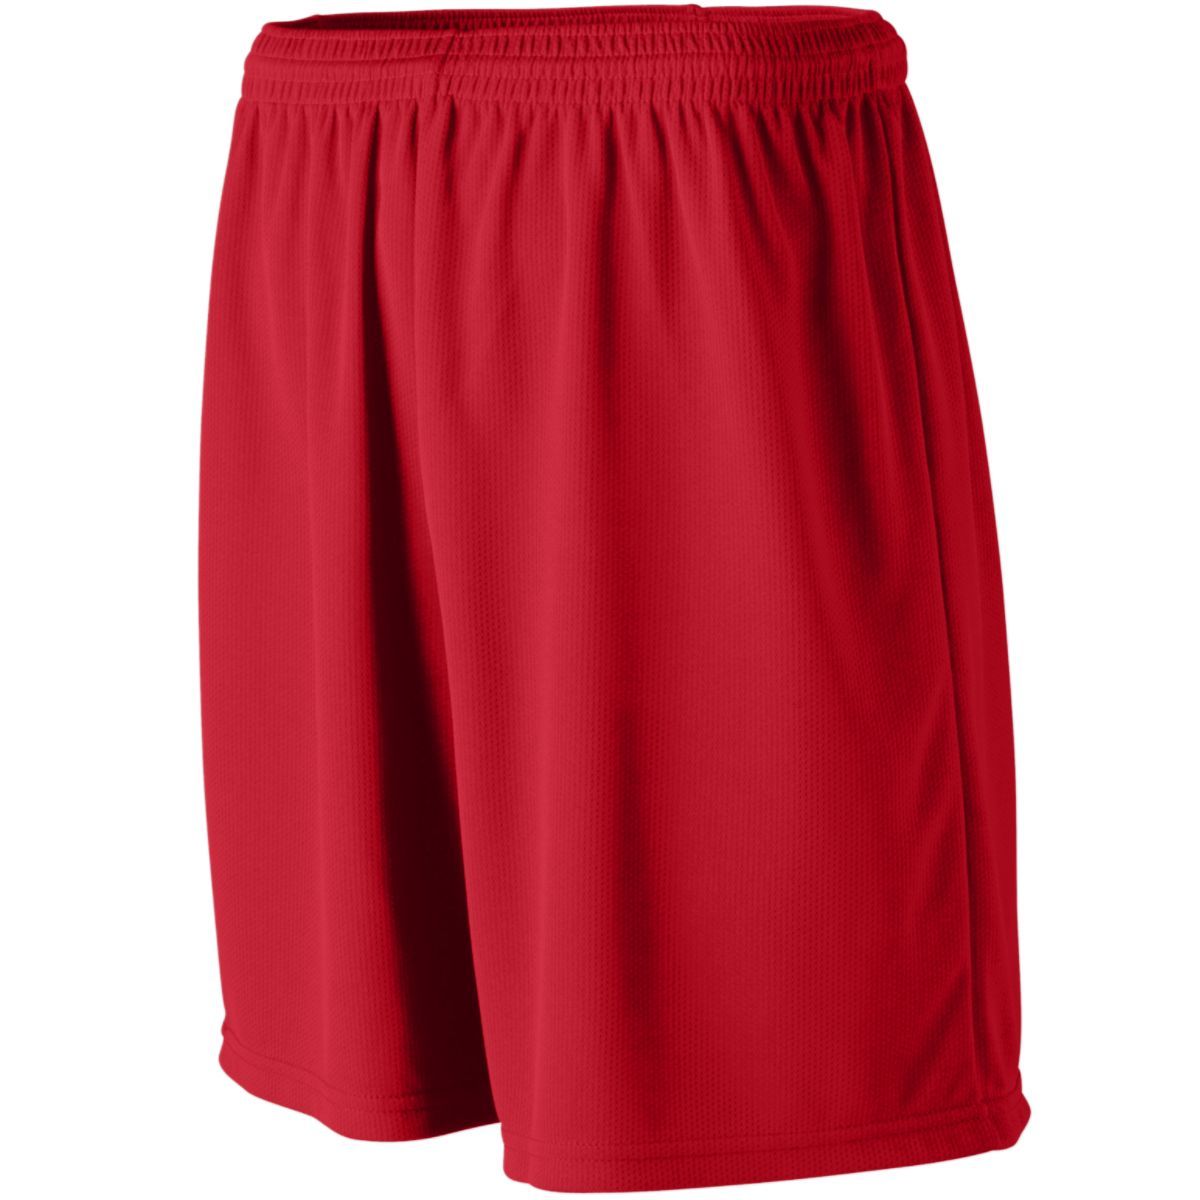 Augusta Sportswear Wicking Mesh Athletic Shorts in Red  -Part of the Adult, Adult-Shorts, Augusta-Products product lines at KanaleyCreations.com